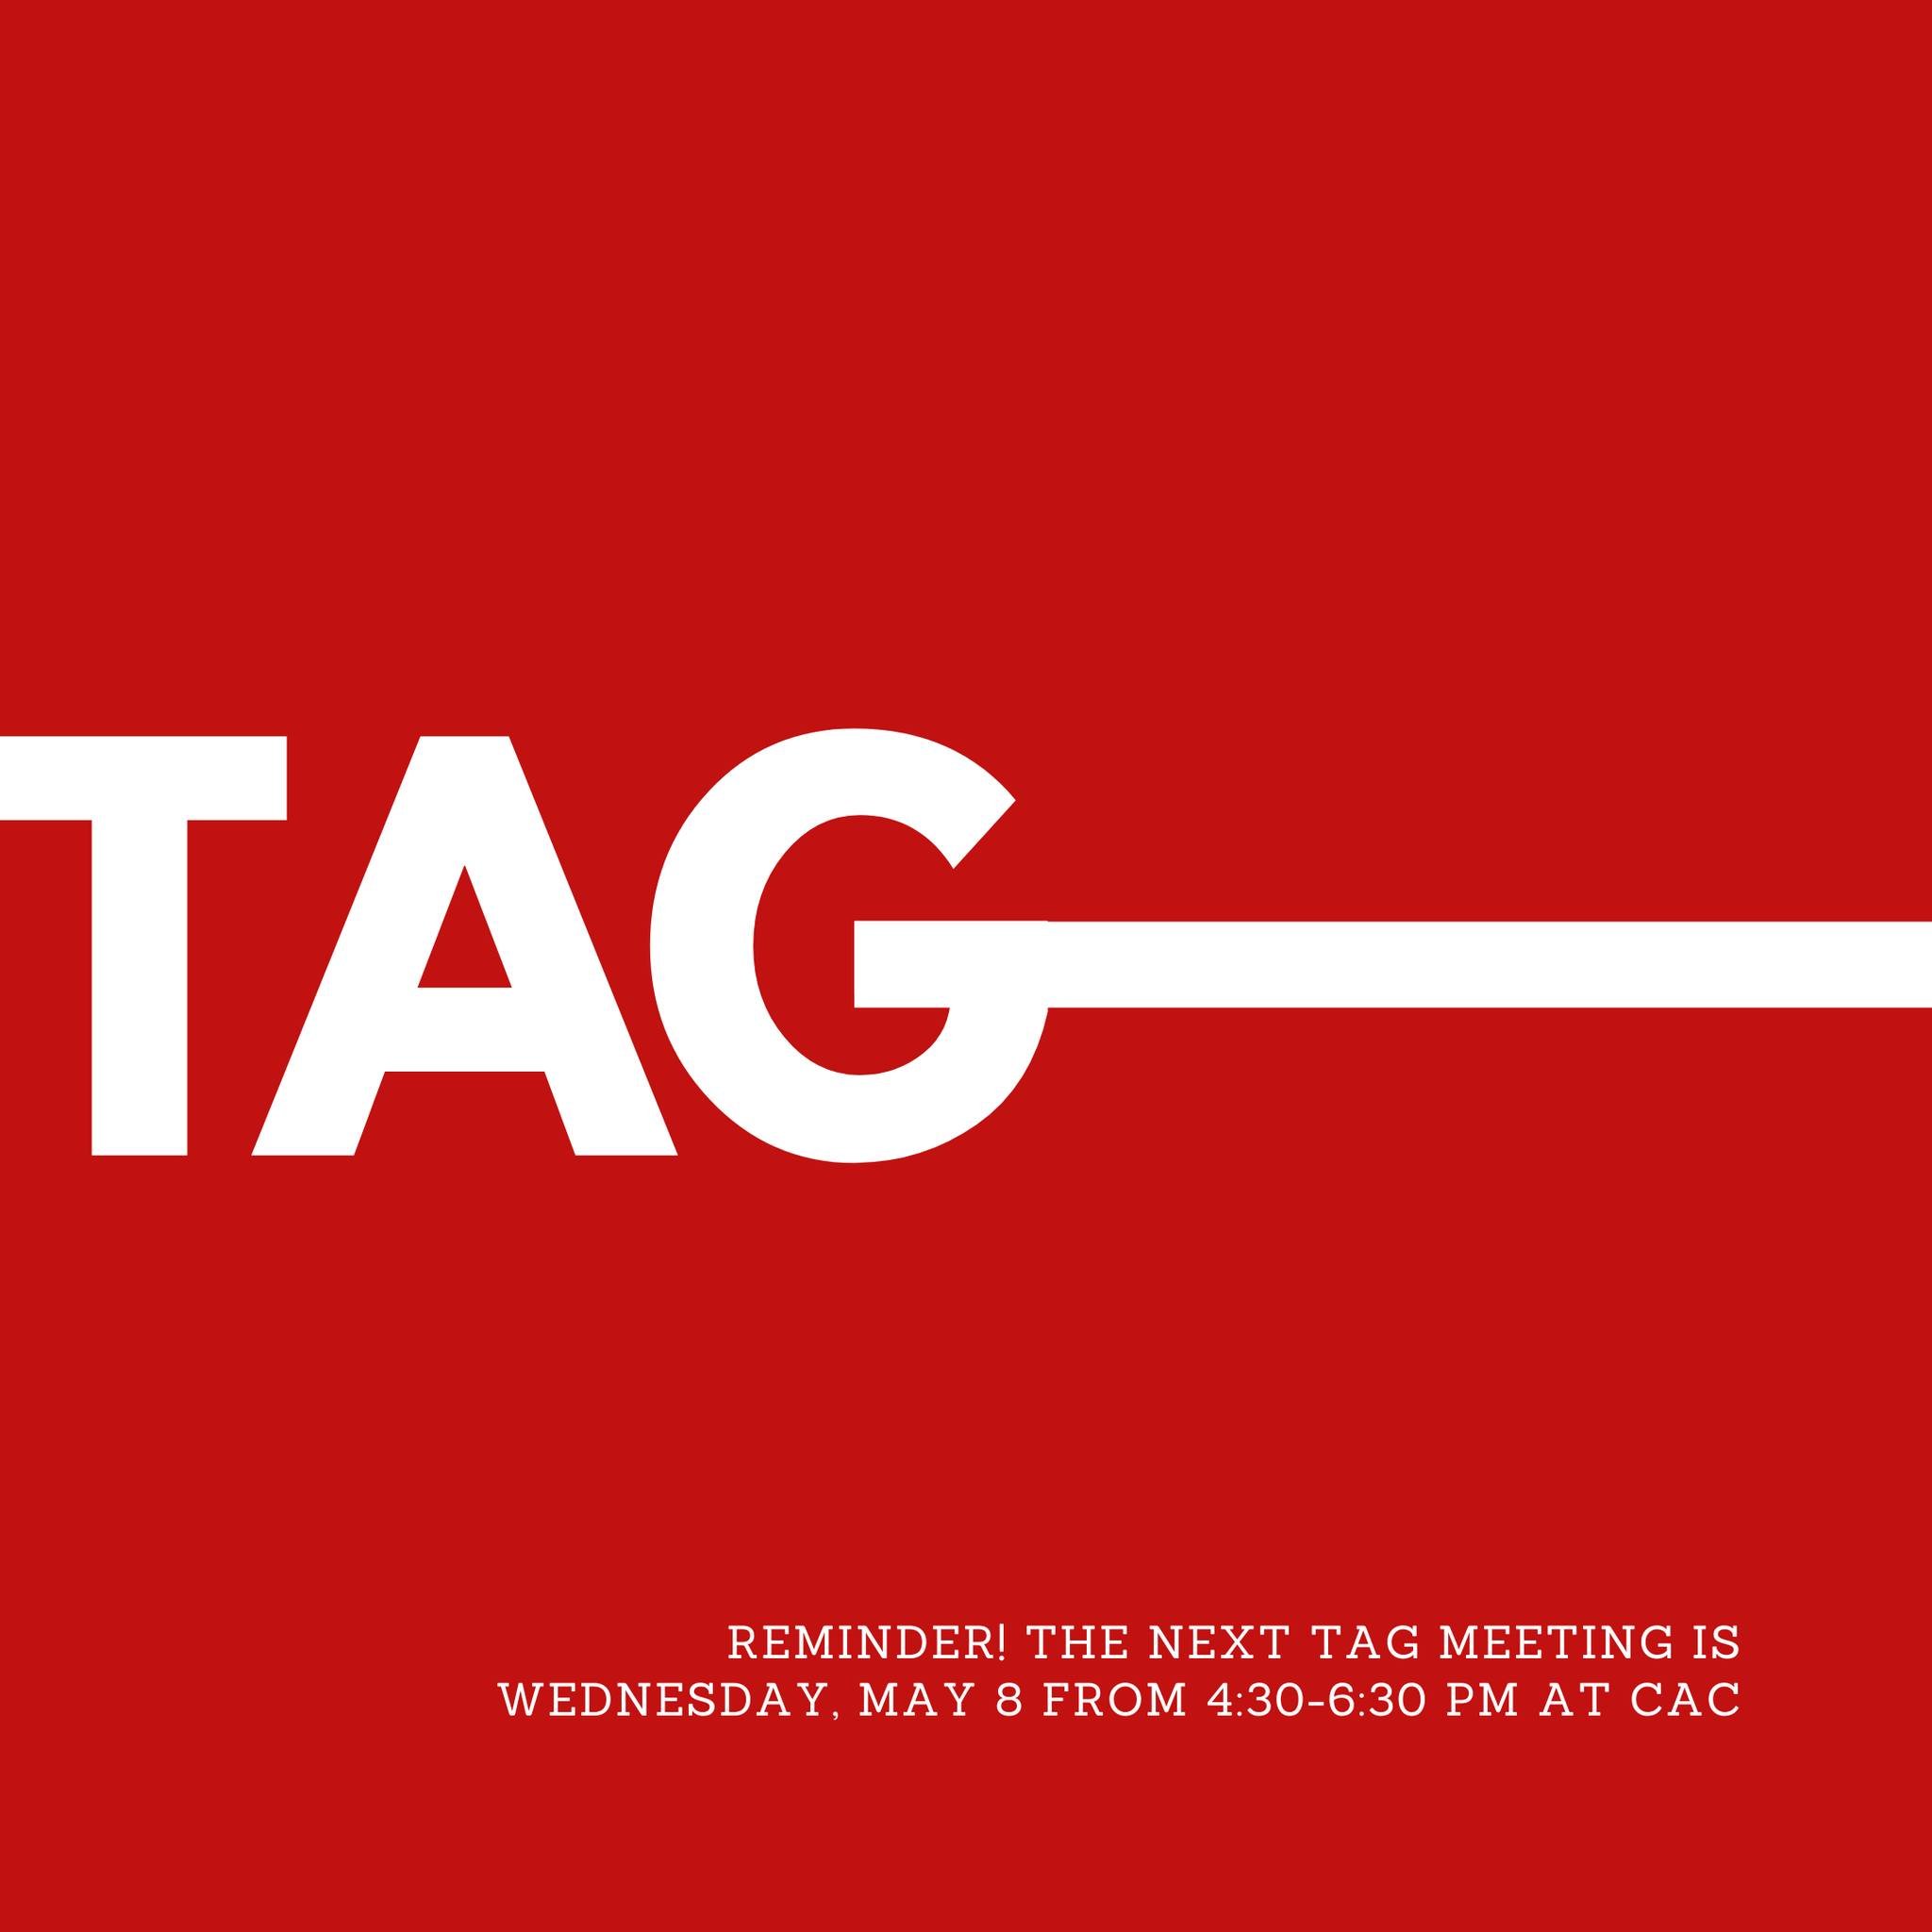 Reminder! The next TAG meeting is Wednesday, May 8 from 4:30-6:30 PM at CAC. 

At this meeting, TAG artists will enjoy a special workshop with local board game designer Stefan Barkow where they will learn to develop their own game from initial concep